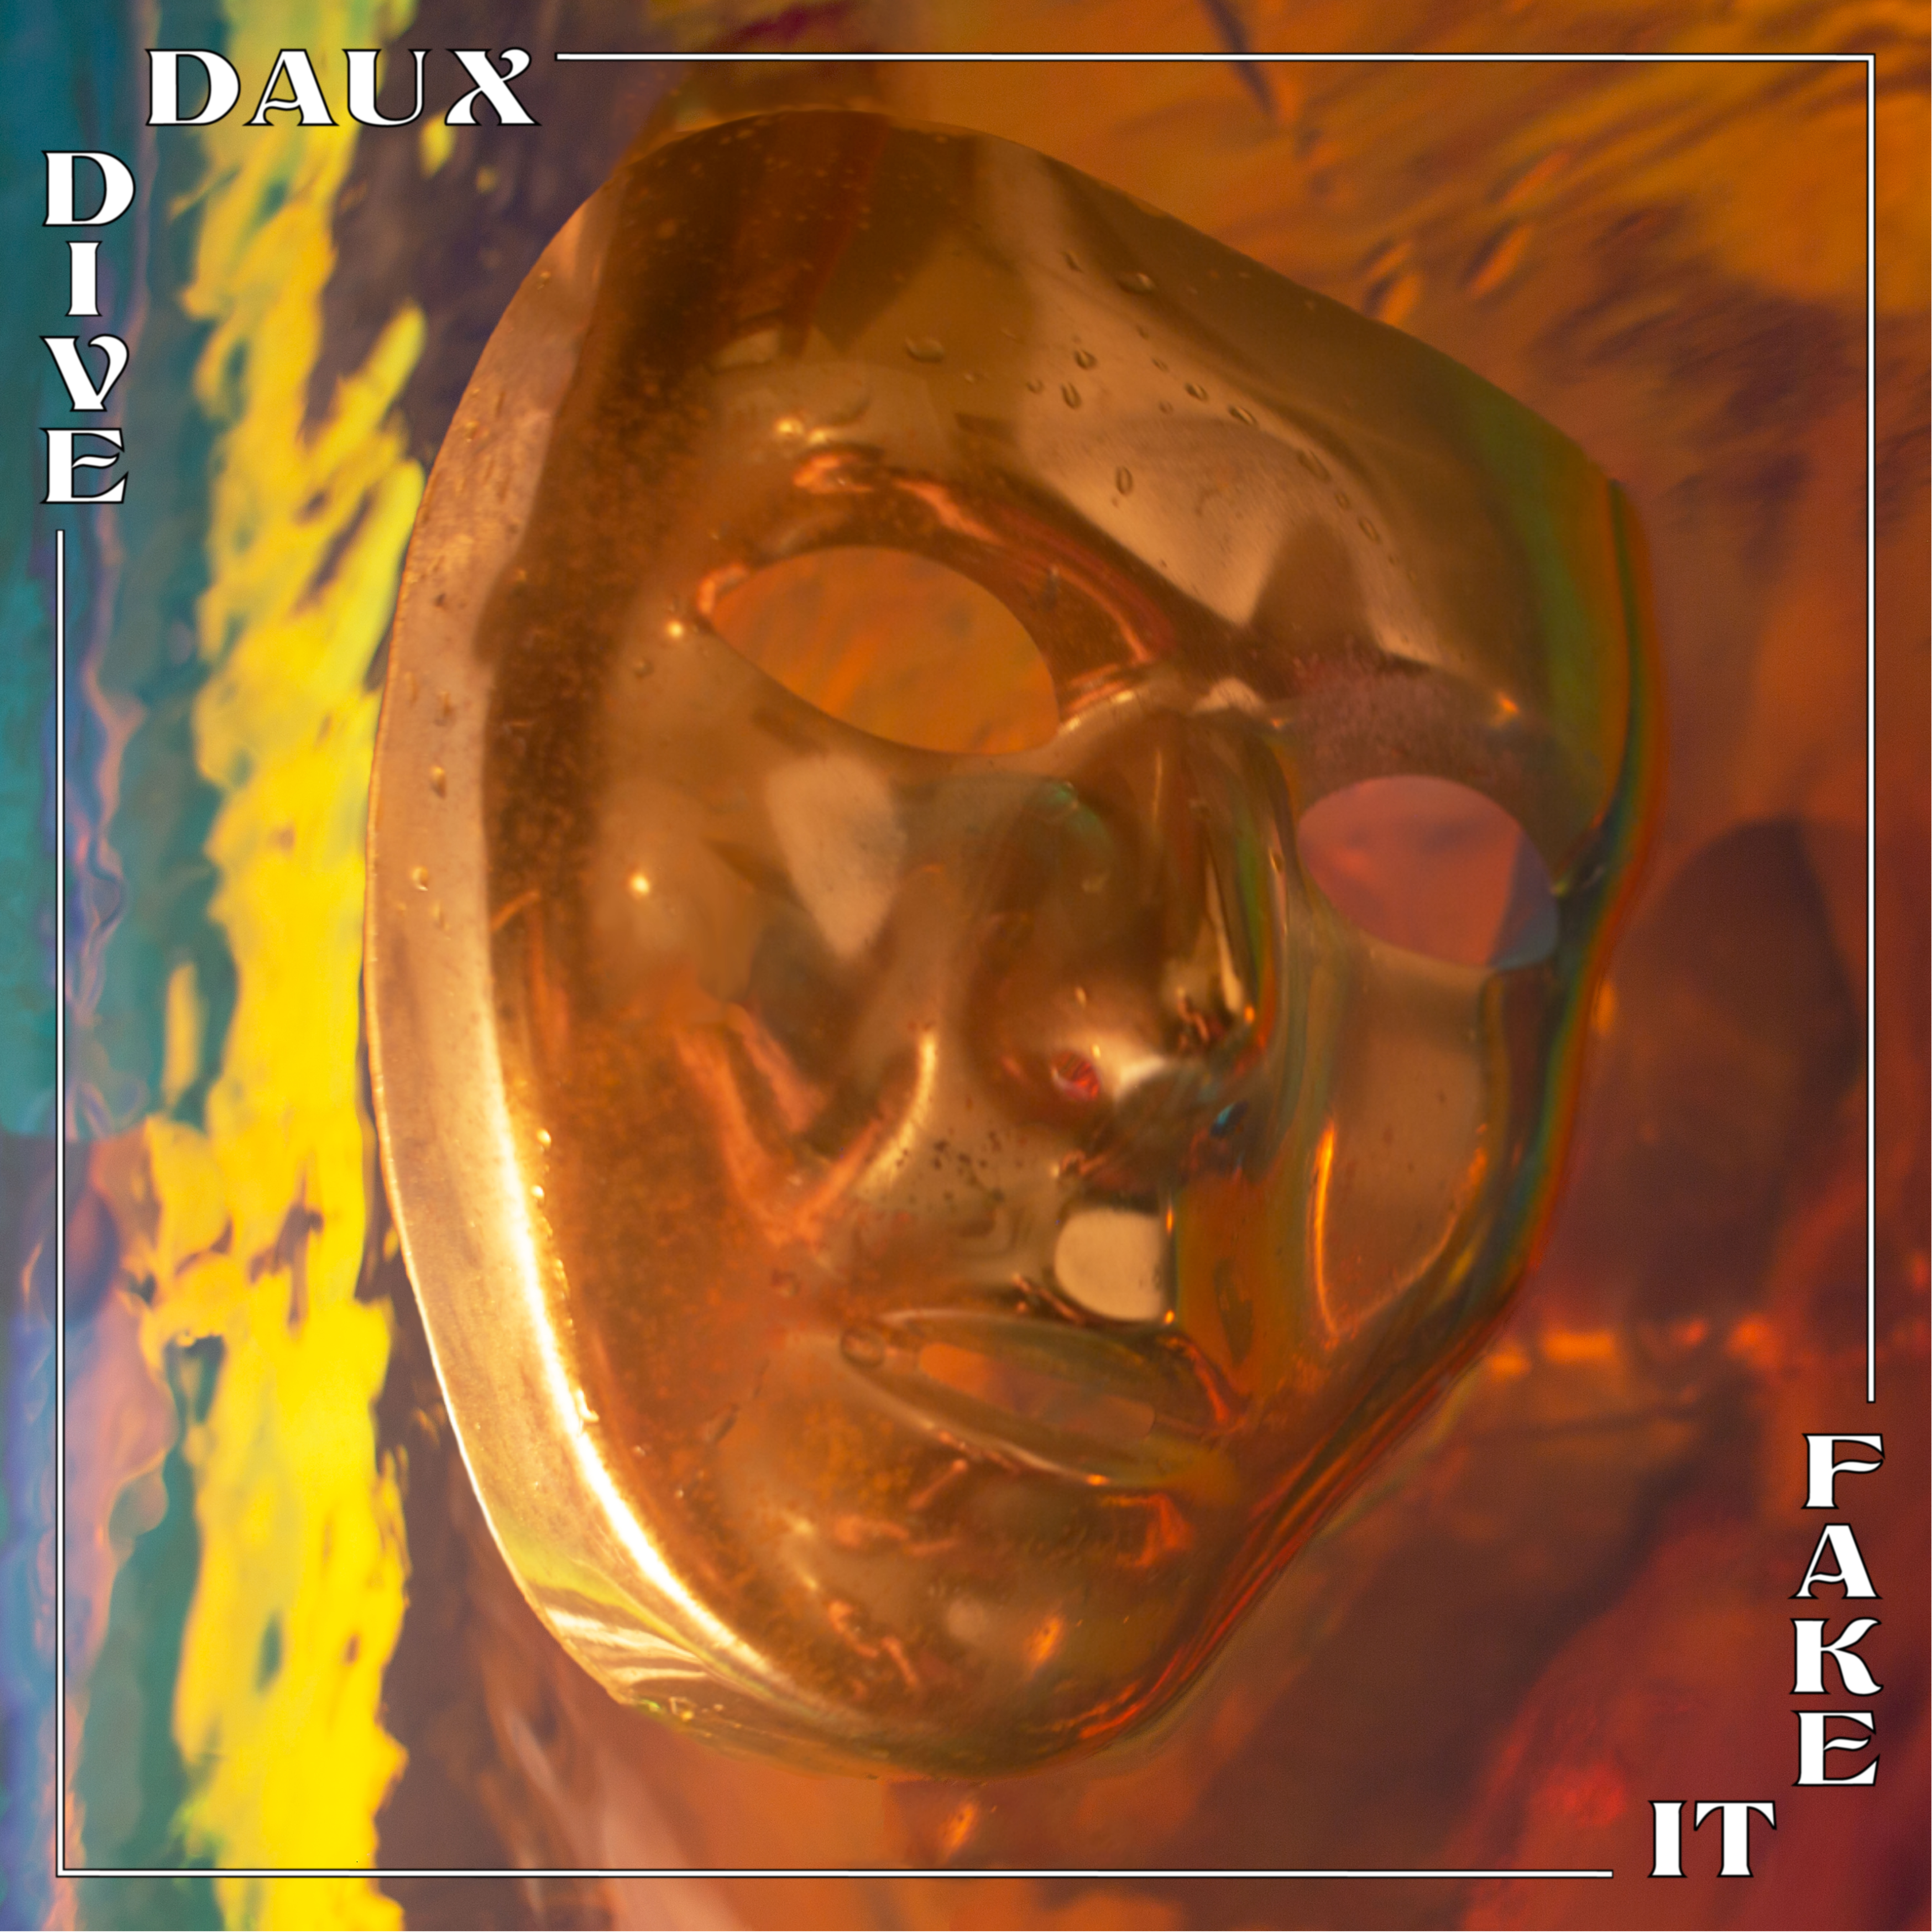 Artwork for track: Fake It by DAUX DIVE